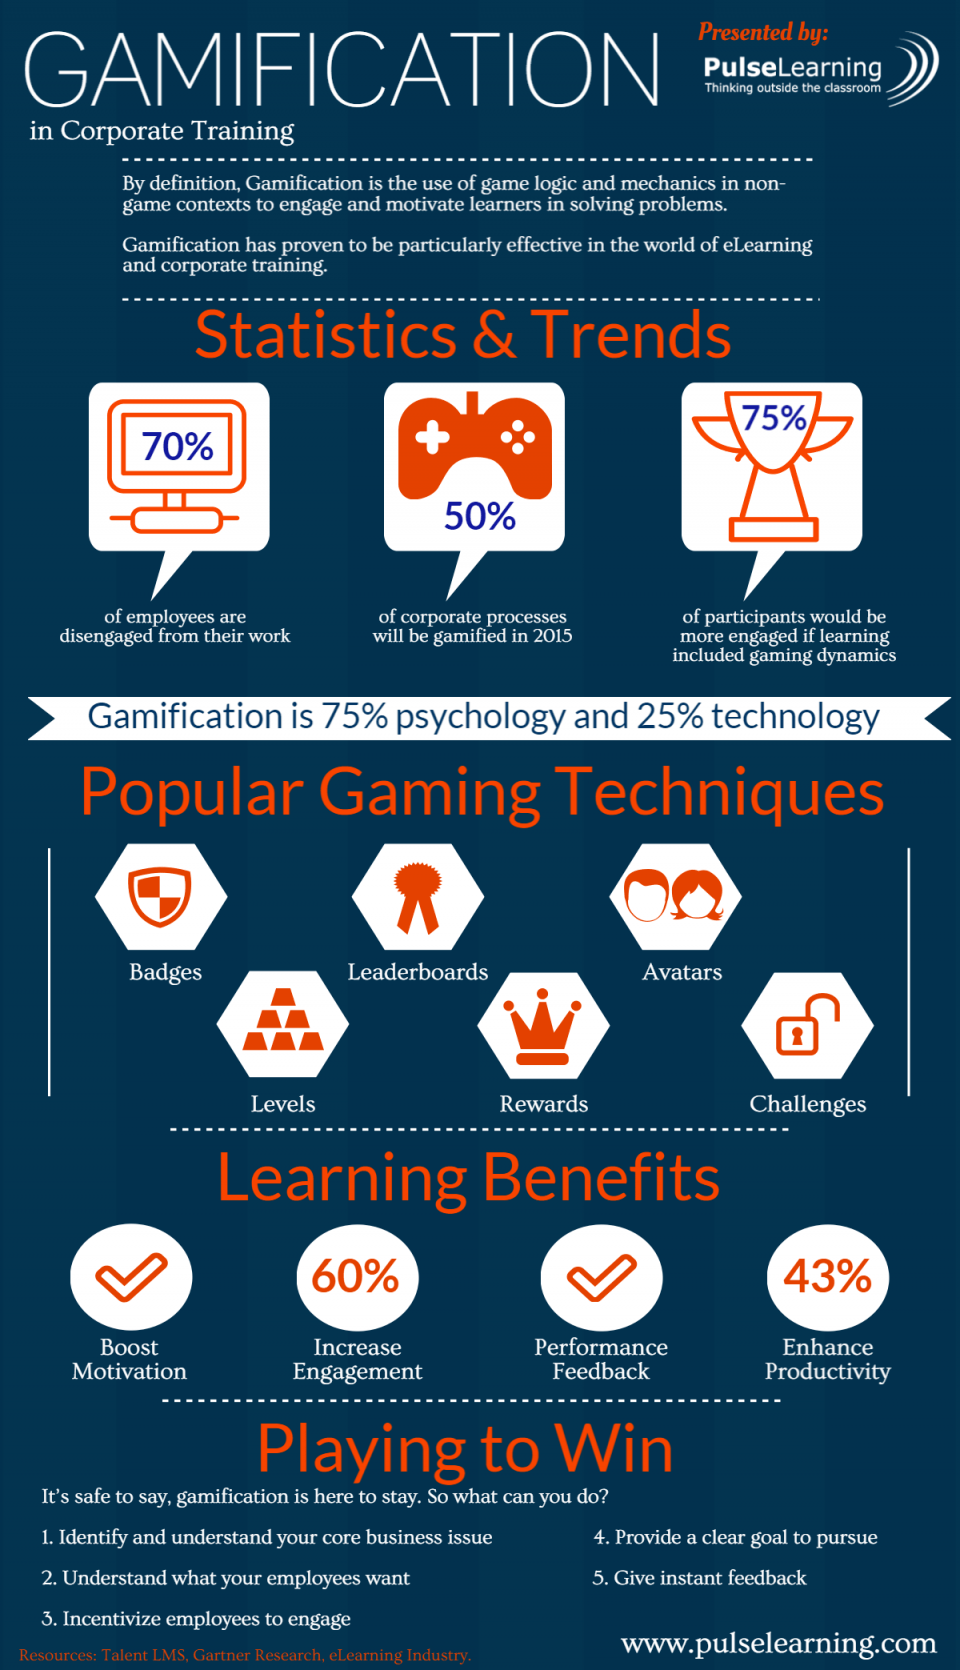 Gamification in Corporate Training Infographic